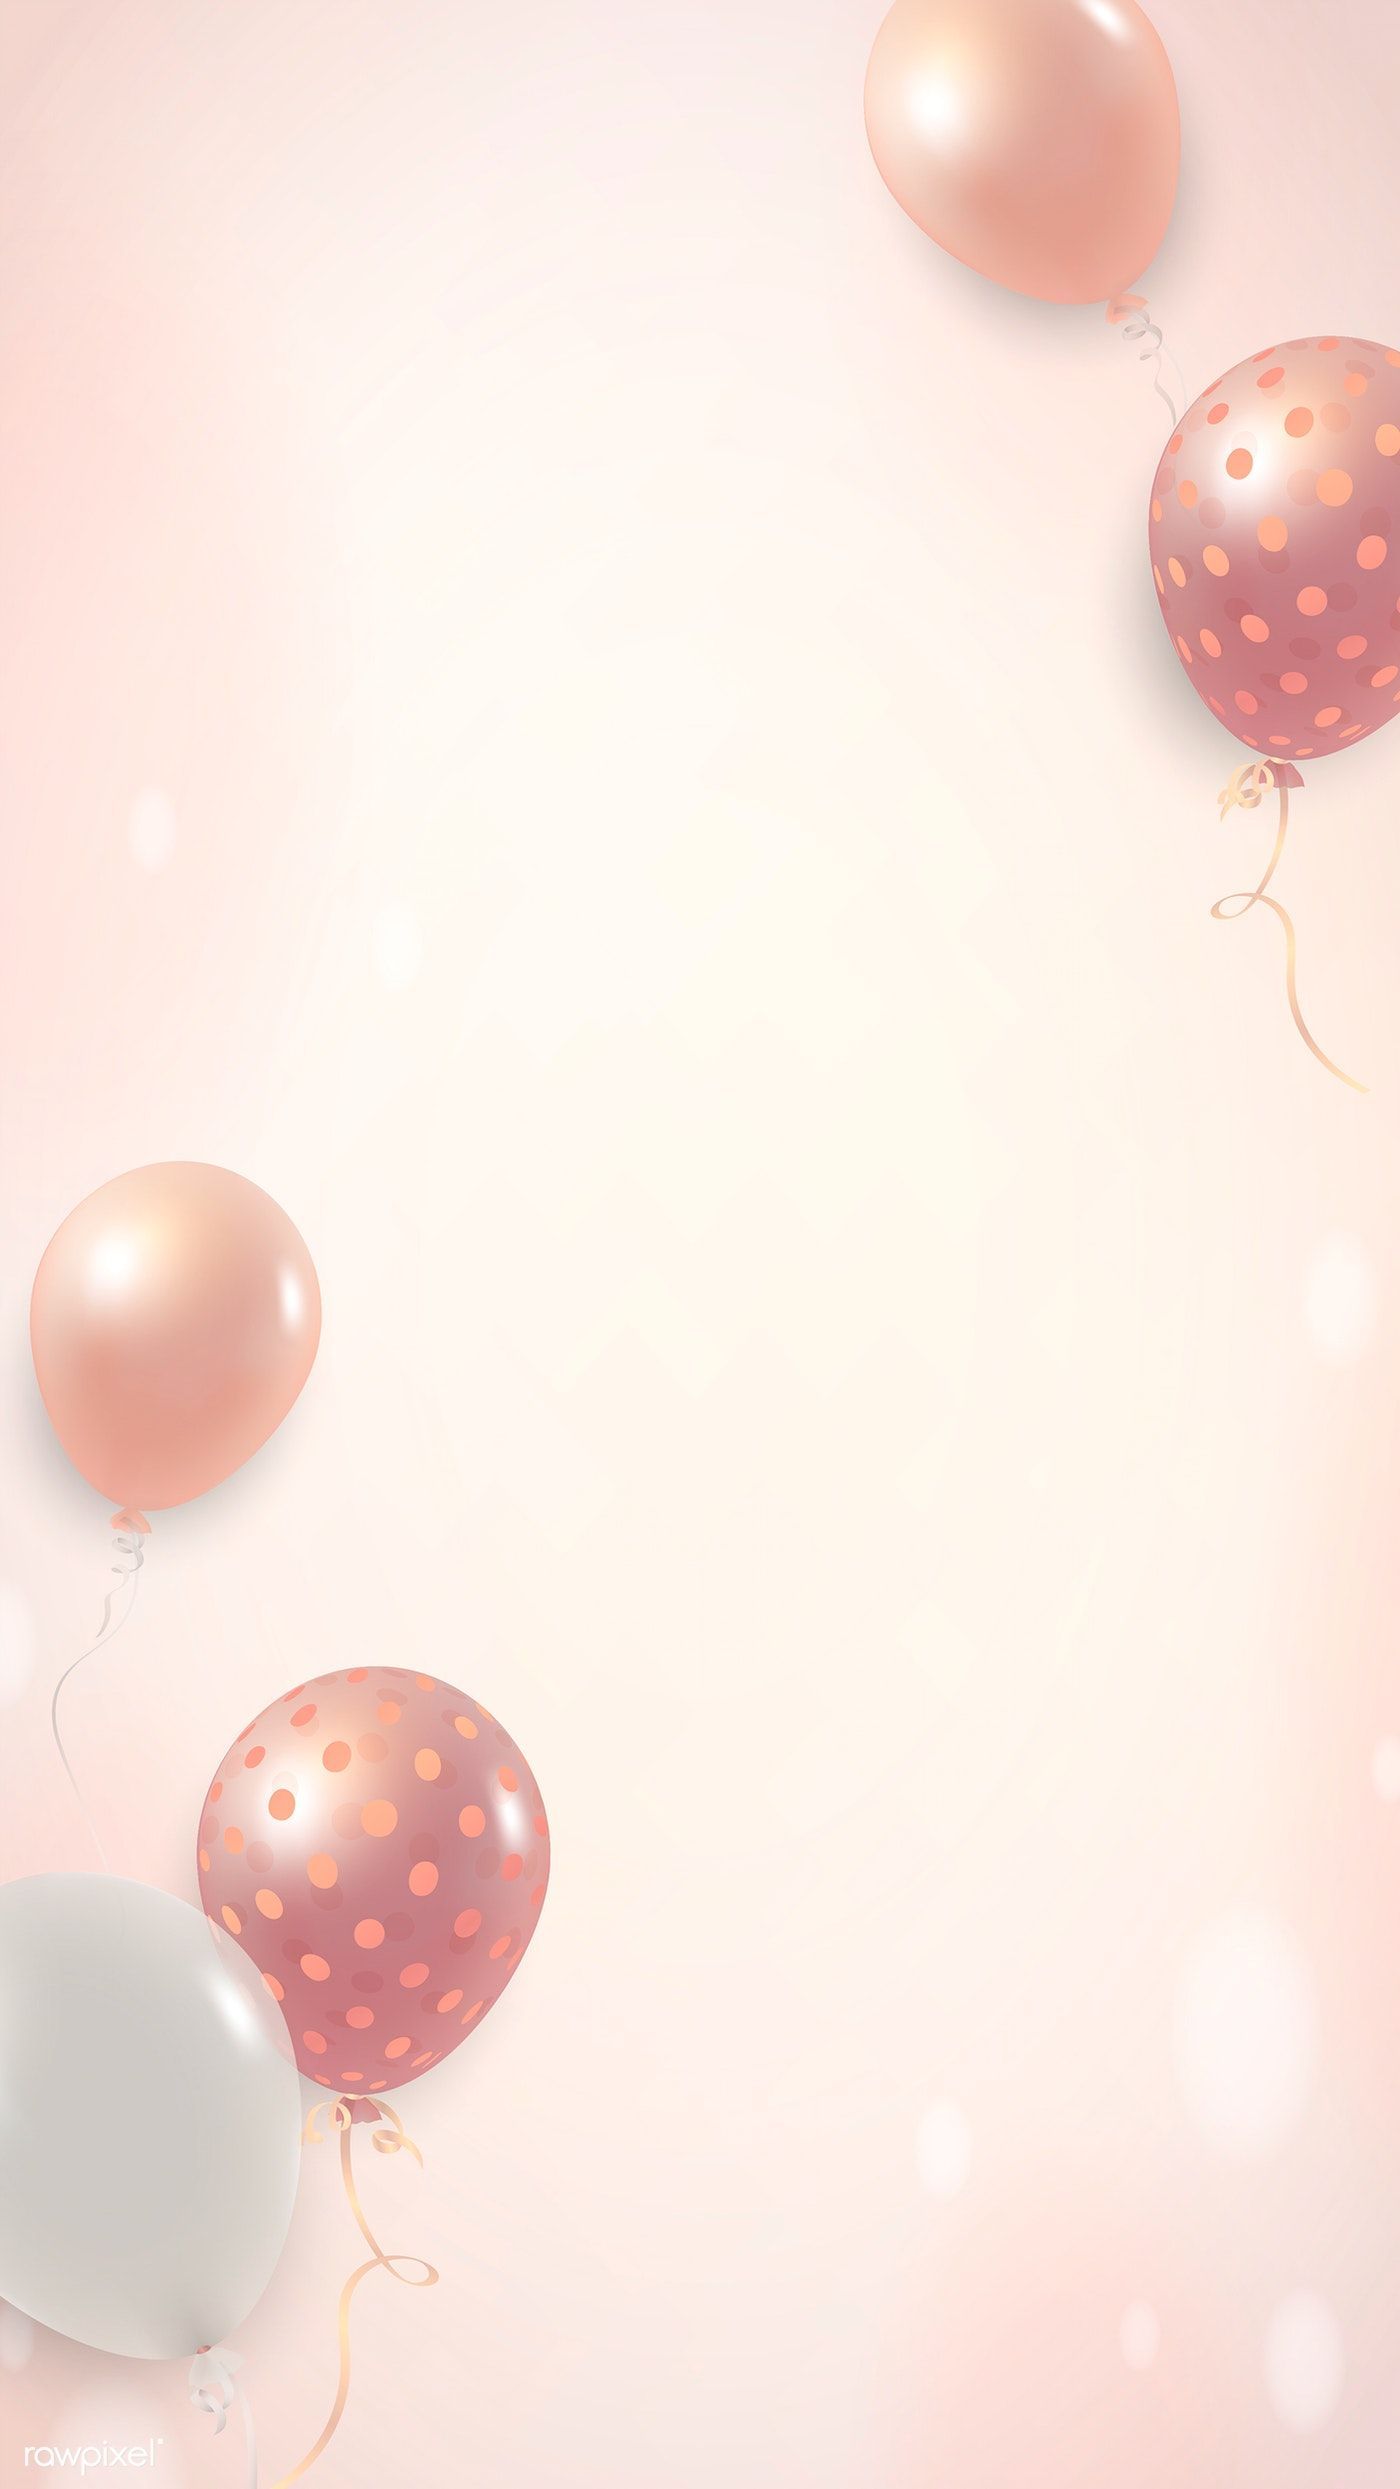 A pink and white balloon background - Birthday